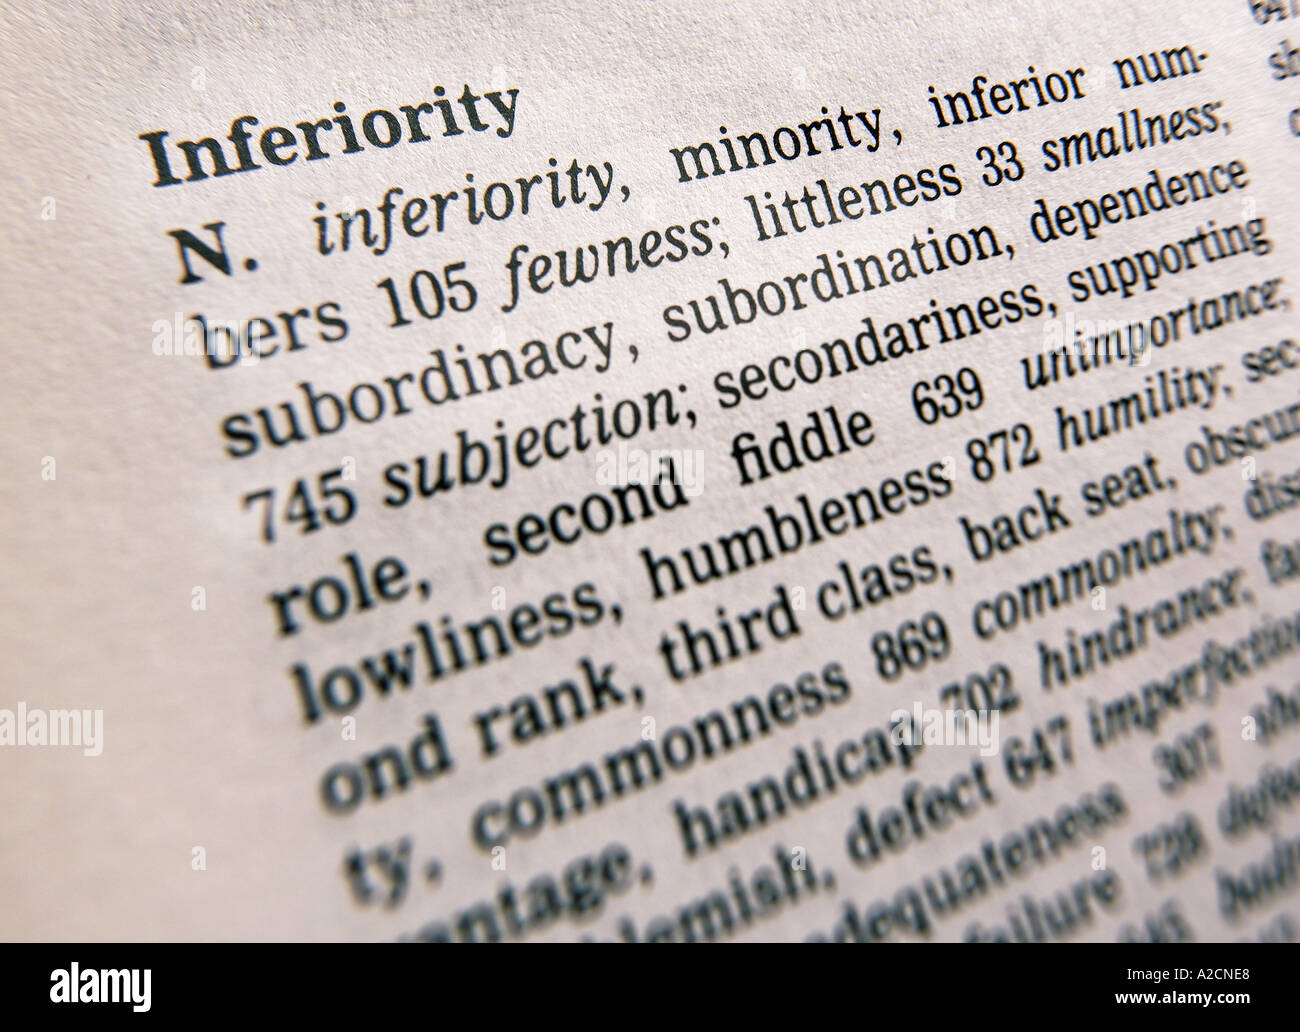 THESAURUS PAGE SHOWING DEFINITION OF WORD INFERIORITY Stock Photo